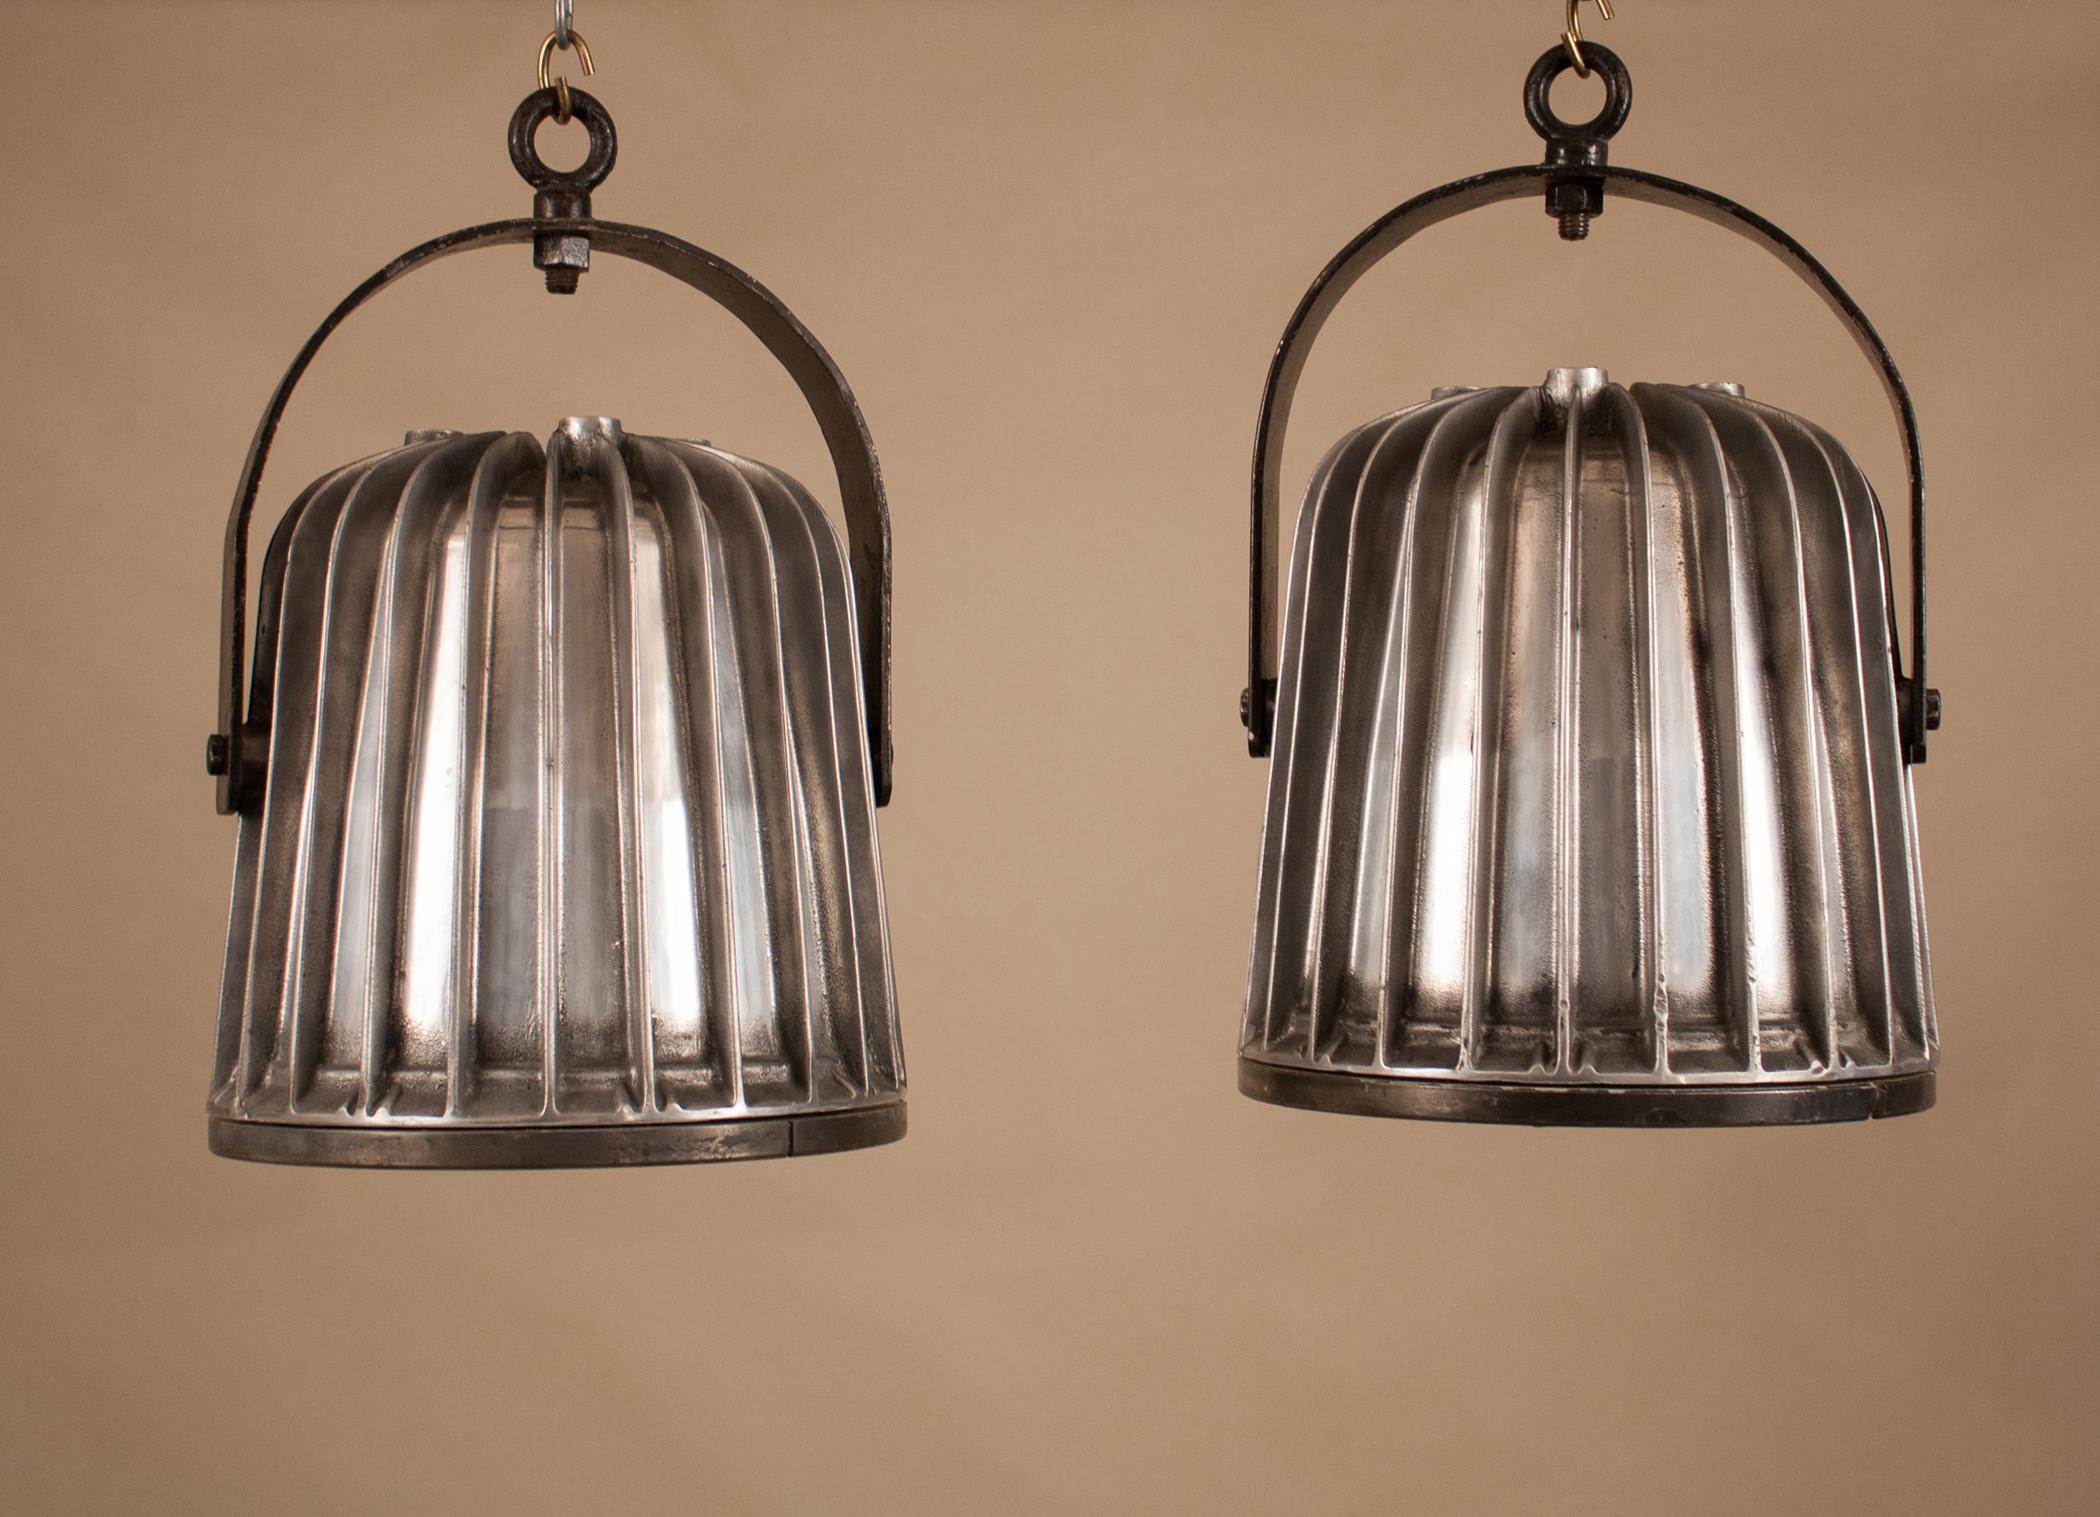 Trés cool pair of vintage aluminum Industrial pendant lights with tempered glass lenses. Manufactured by CEAG, Germany in the 1960s, these explosion-protected floodlights were likely salvaged from a ship- or dockyard. Like many marine lights, the